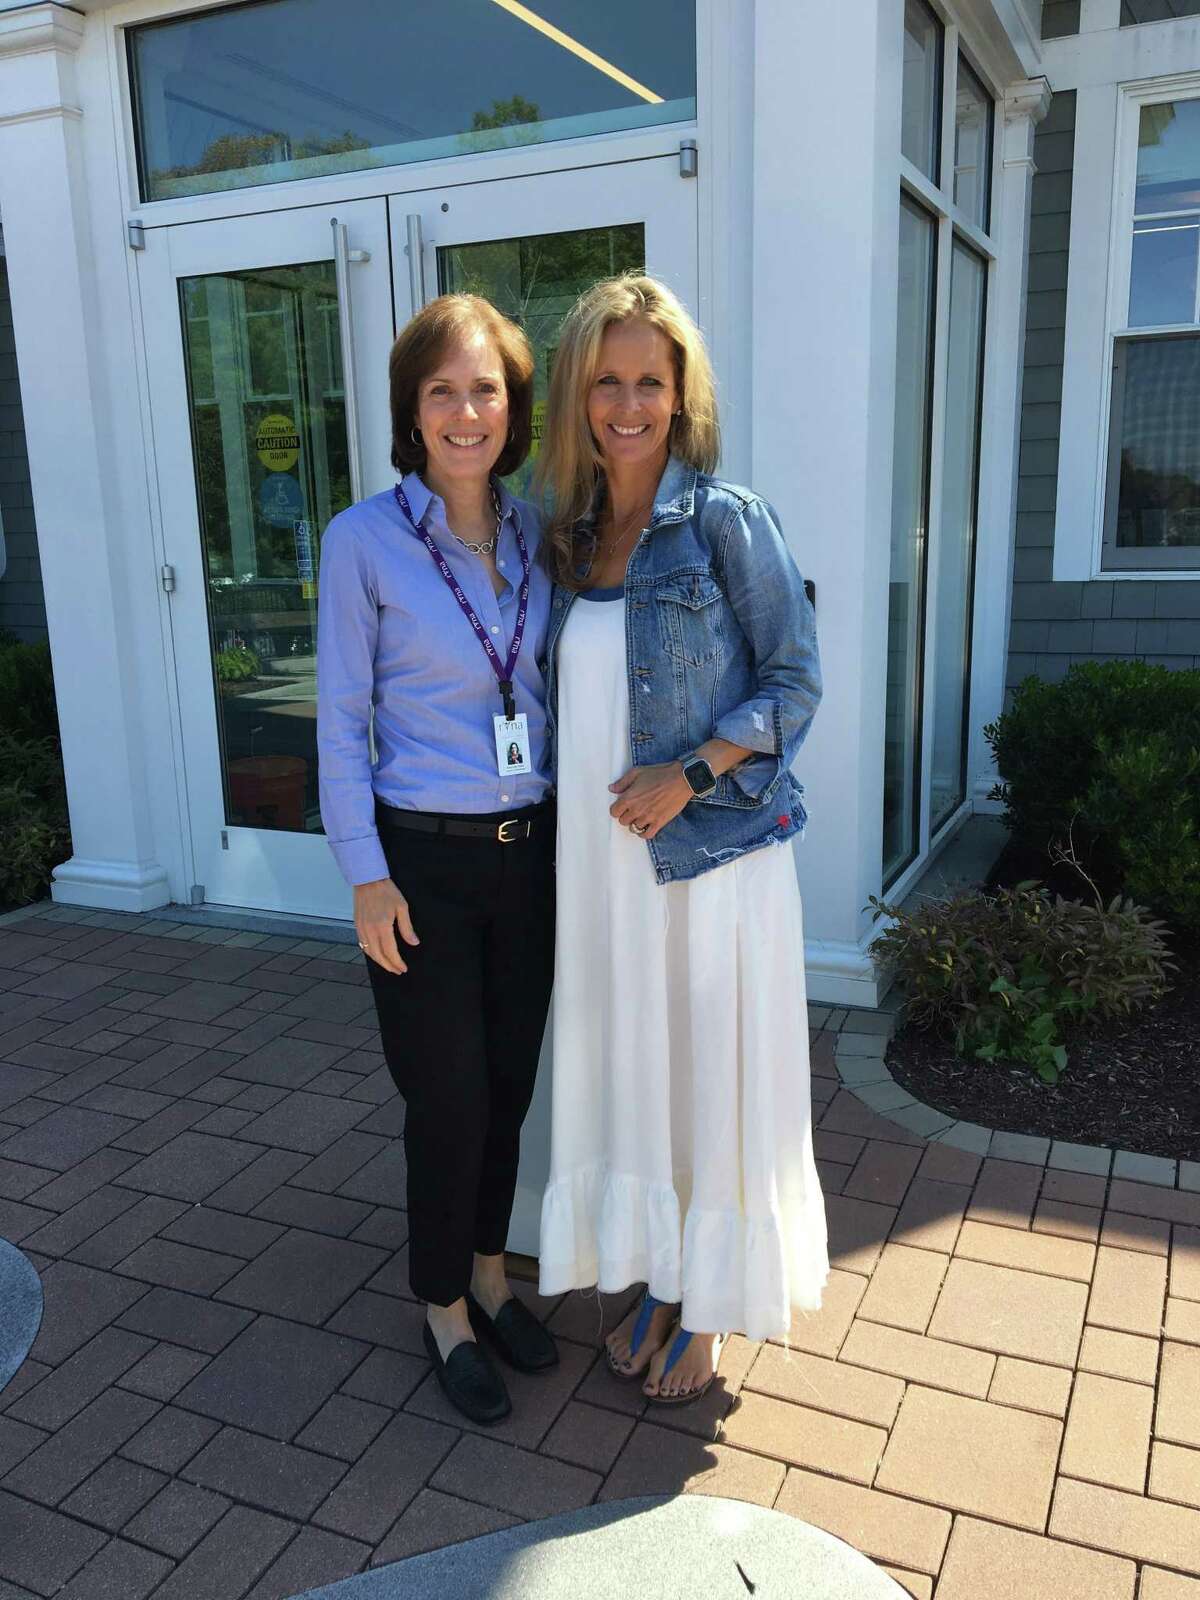 MJ Heller, director of philanthropy at RVNA, with Autumn Dinner Co-Chair Nicole Connors. (Not pictured: Amber Holder, co-chair).